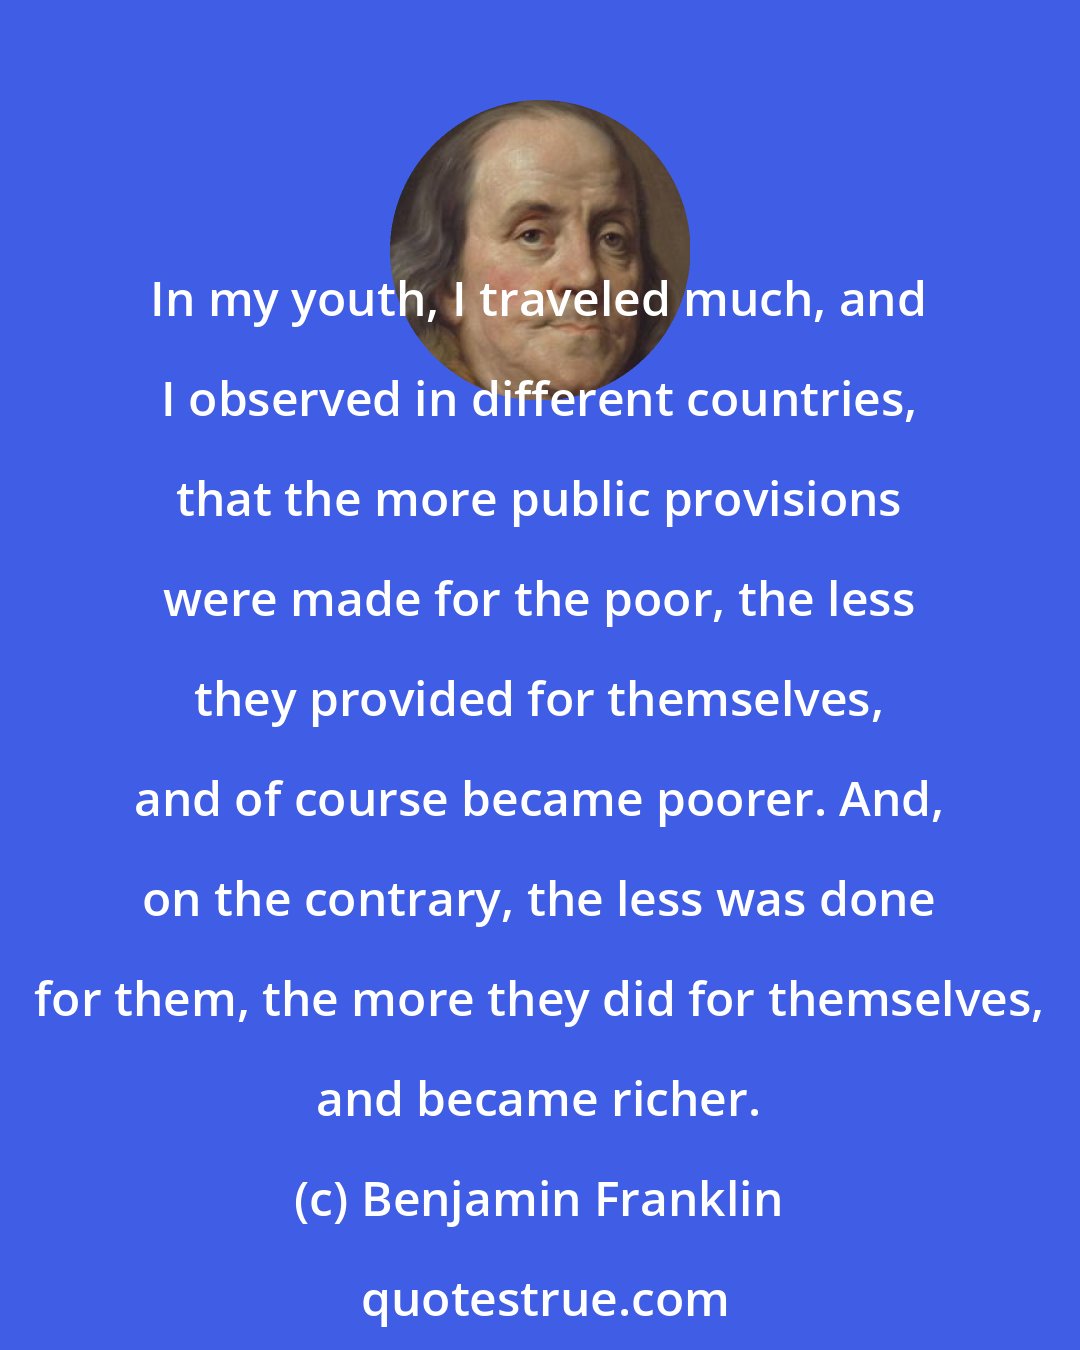 Benjamin Franklin: In my youth, I traveled much, and I observed in different countries, that the more public provisions were made for the poor, the less they provided for themselves, and of course became poorer. And, on the contrary, the less was done for them, the more they did for themselves, and became richer.